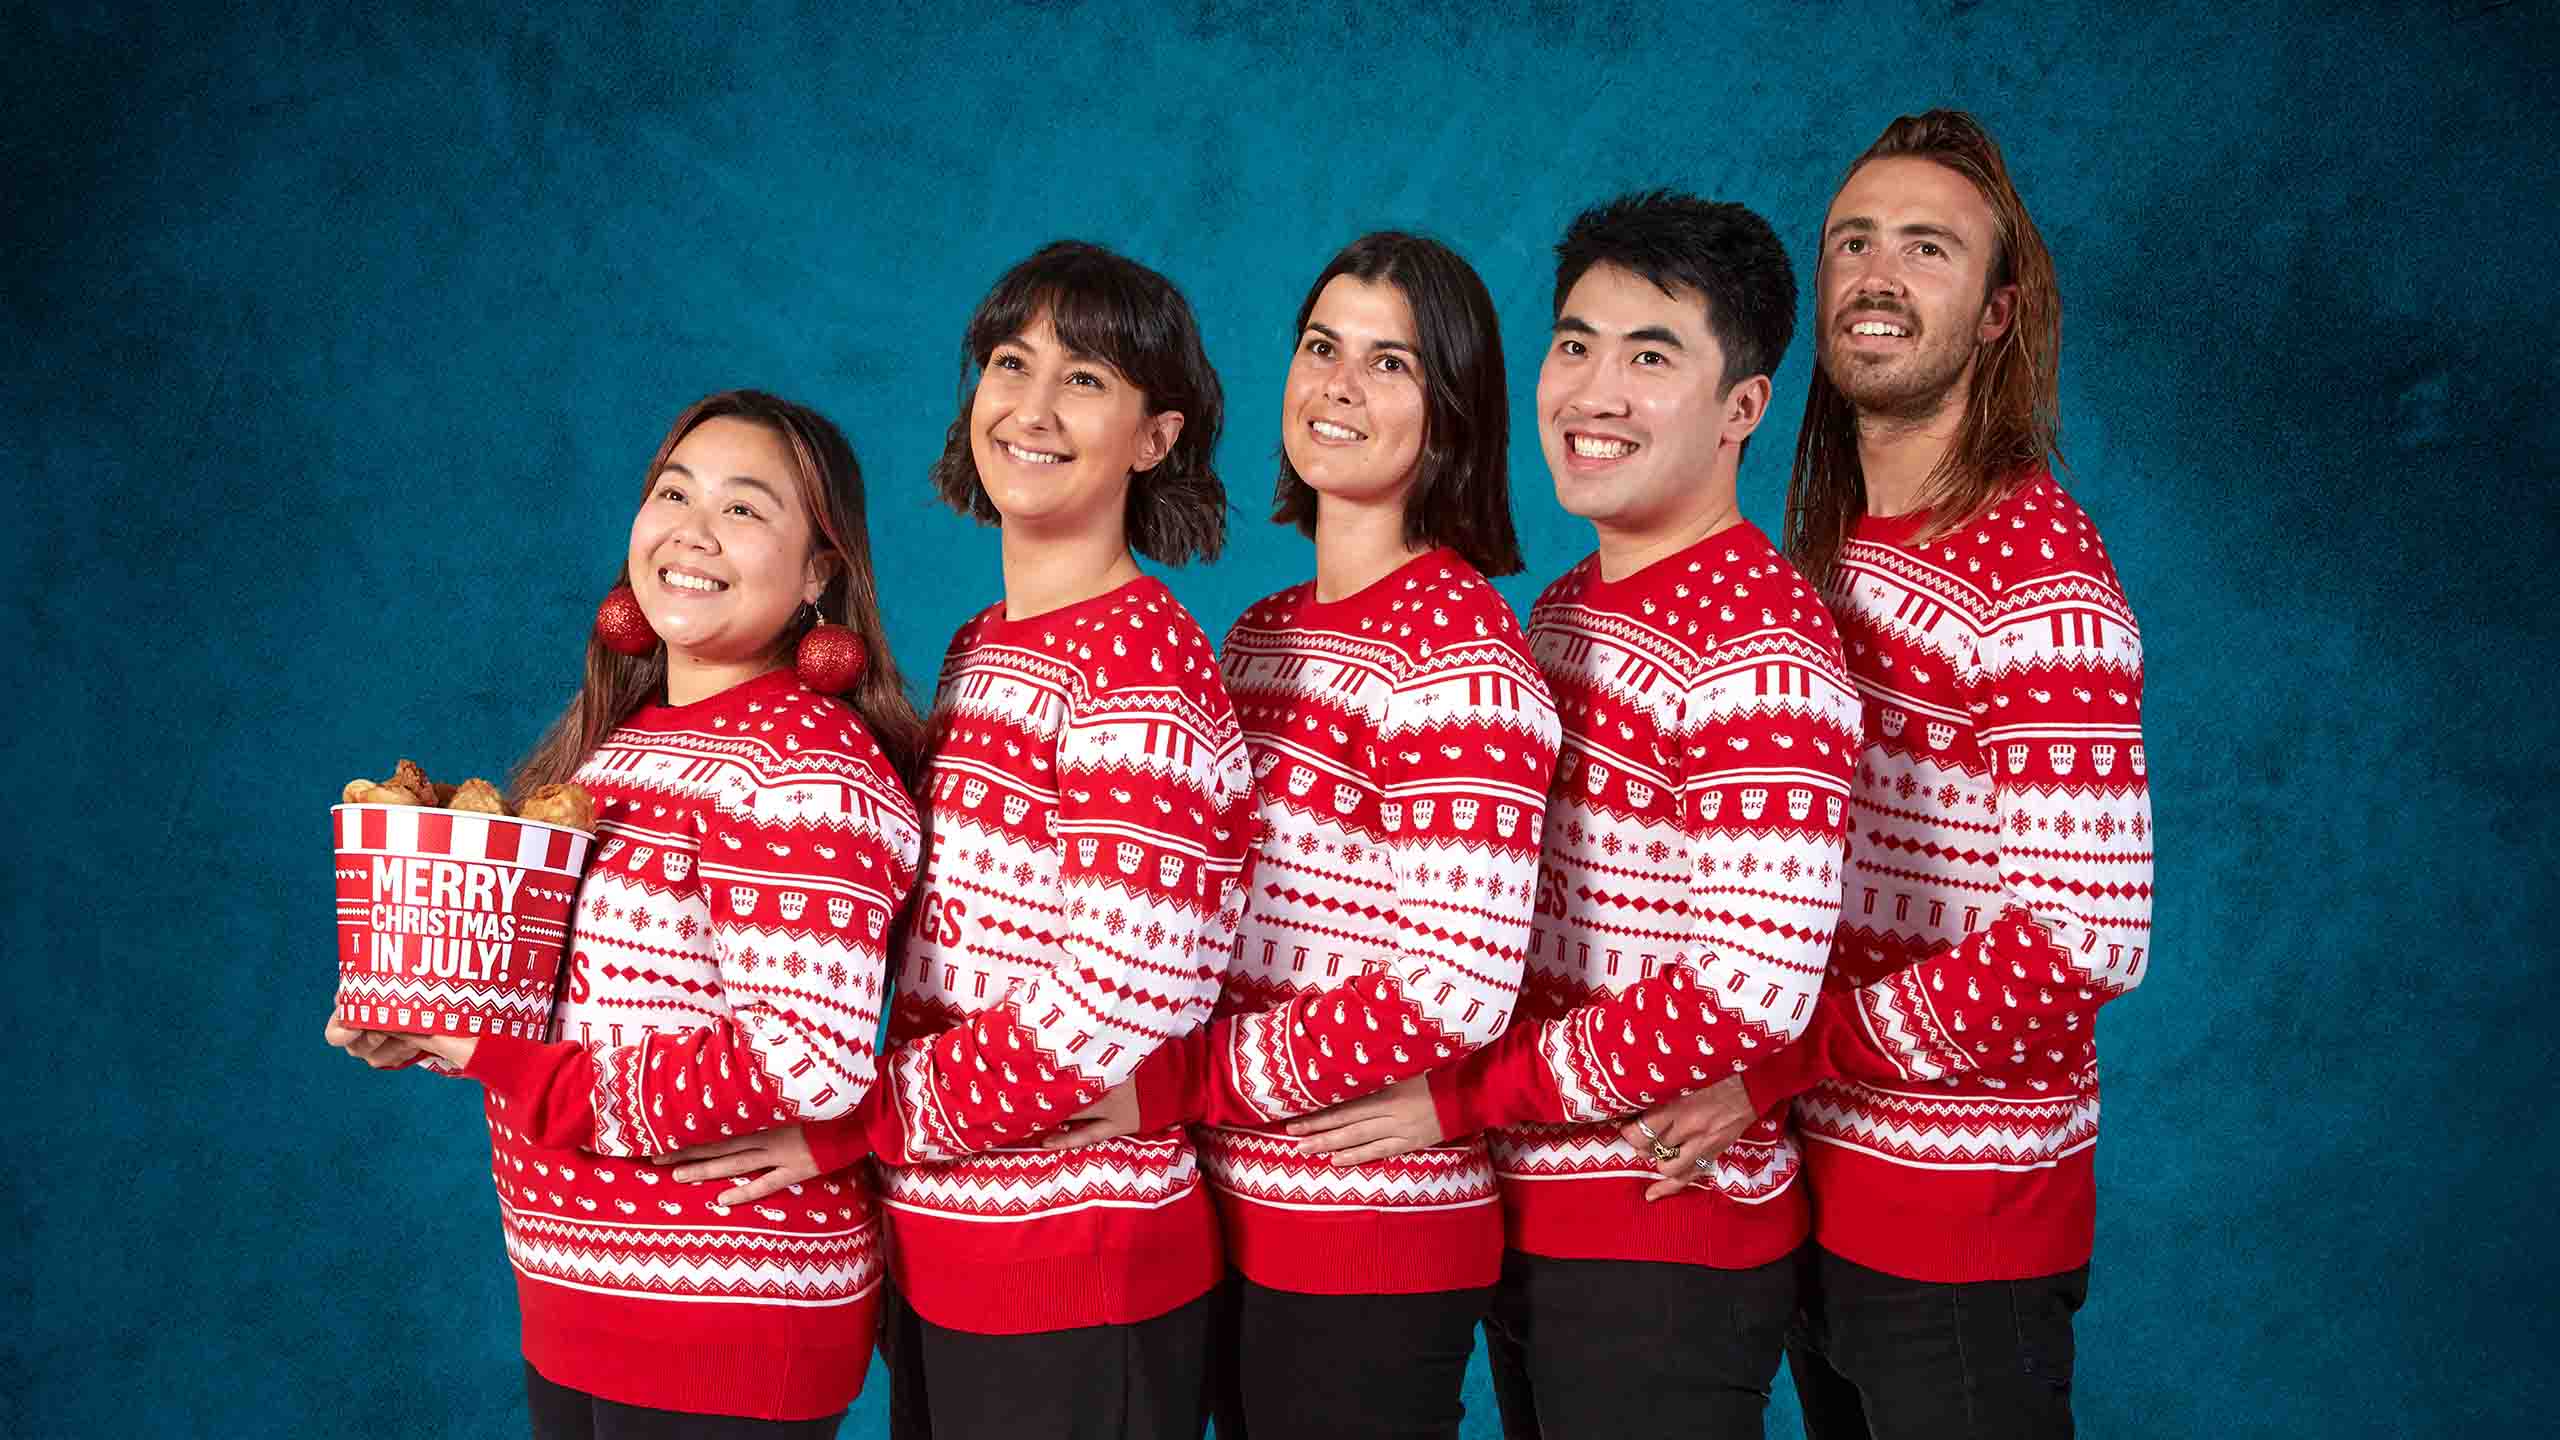 KFC's New Christmas in July Sweater Is Exactly What You Need to Wear While Eating Fried Chicken